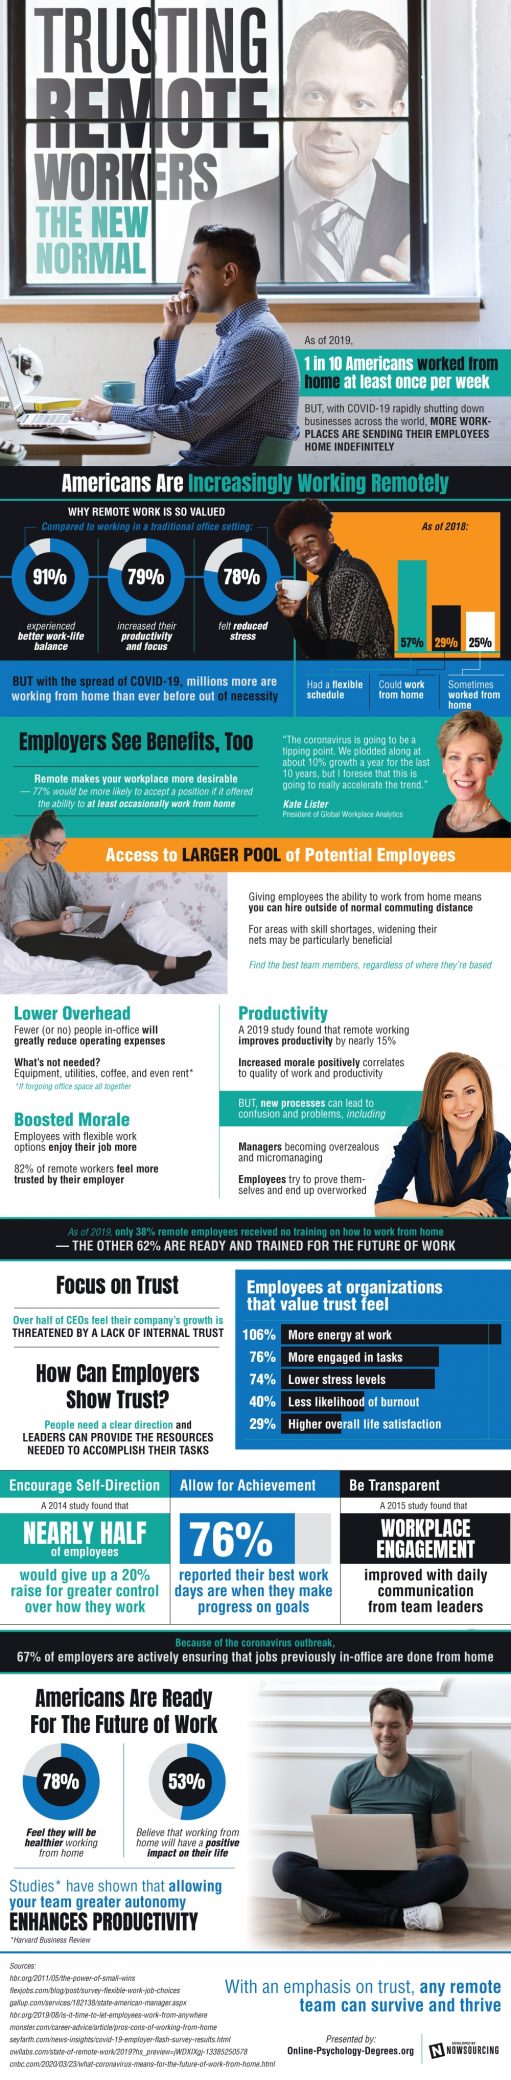 The Psychology of Trusting Remote Workers [Infographic]